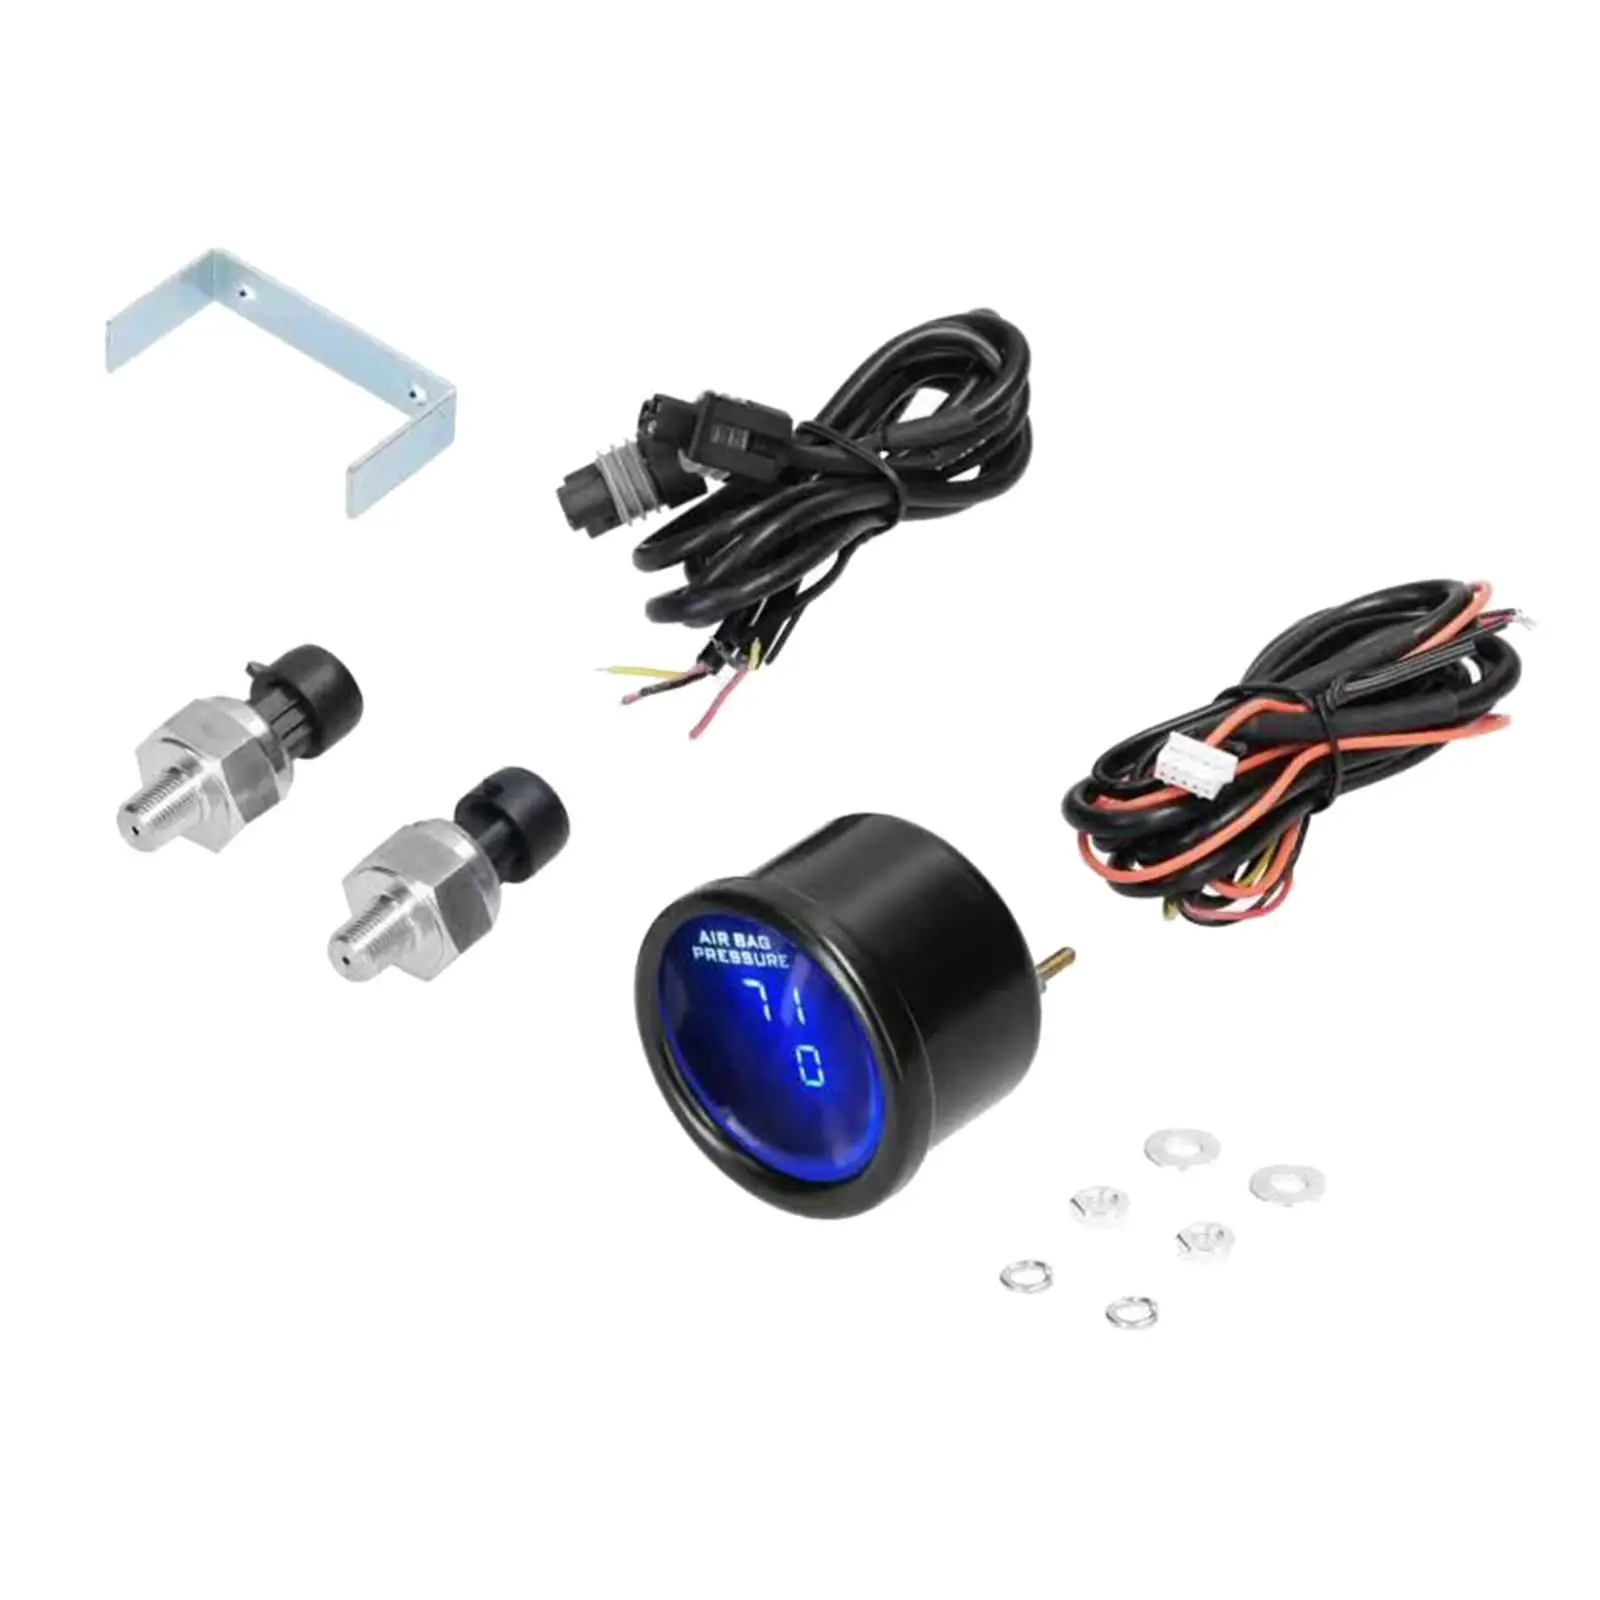 Air Gauge Replacement Car Parts with Sensors Auto Accessory